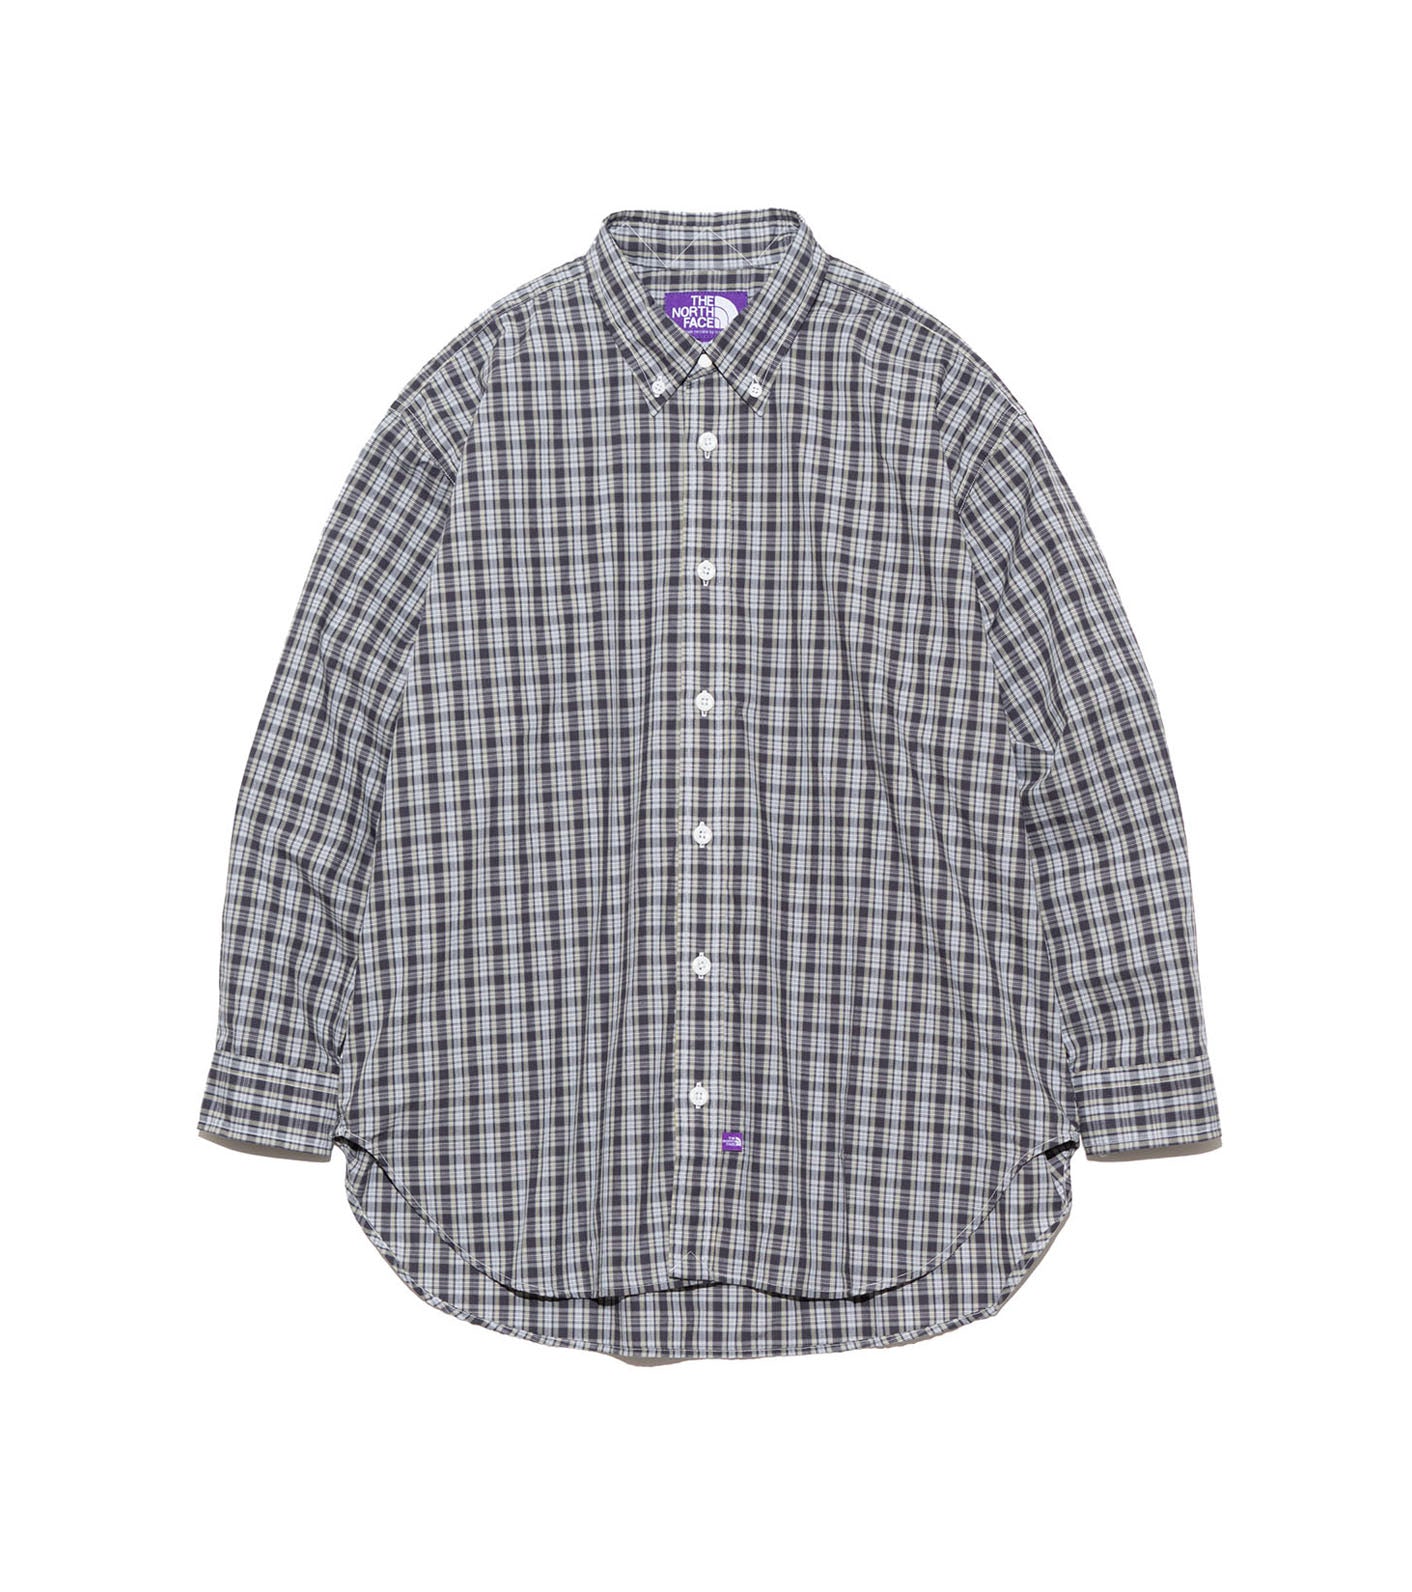 THE NORTH FACE PURPLE LABEL Button Down Plaid Field Shirt for Women ...